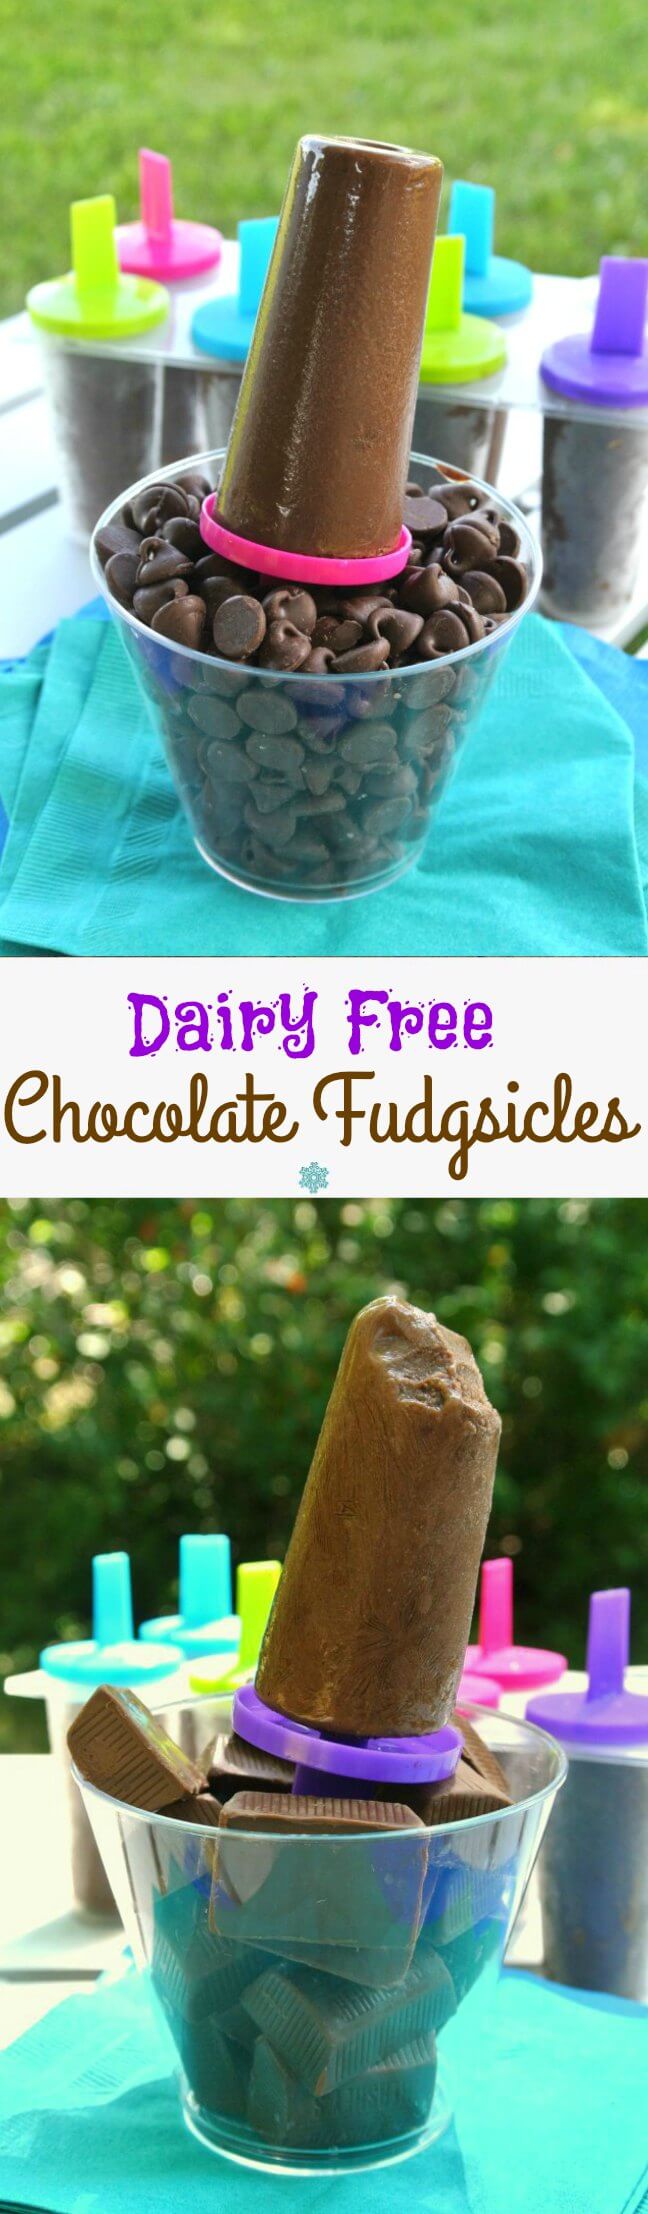 Two pictures one above the other with dairy-free fudgsicles siting in clear cups full of chocolate chips against a turquoise mat.